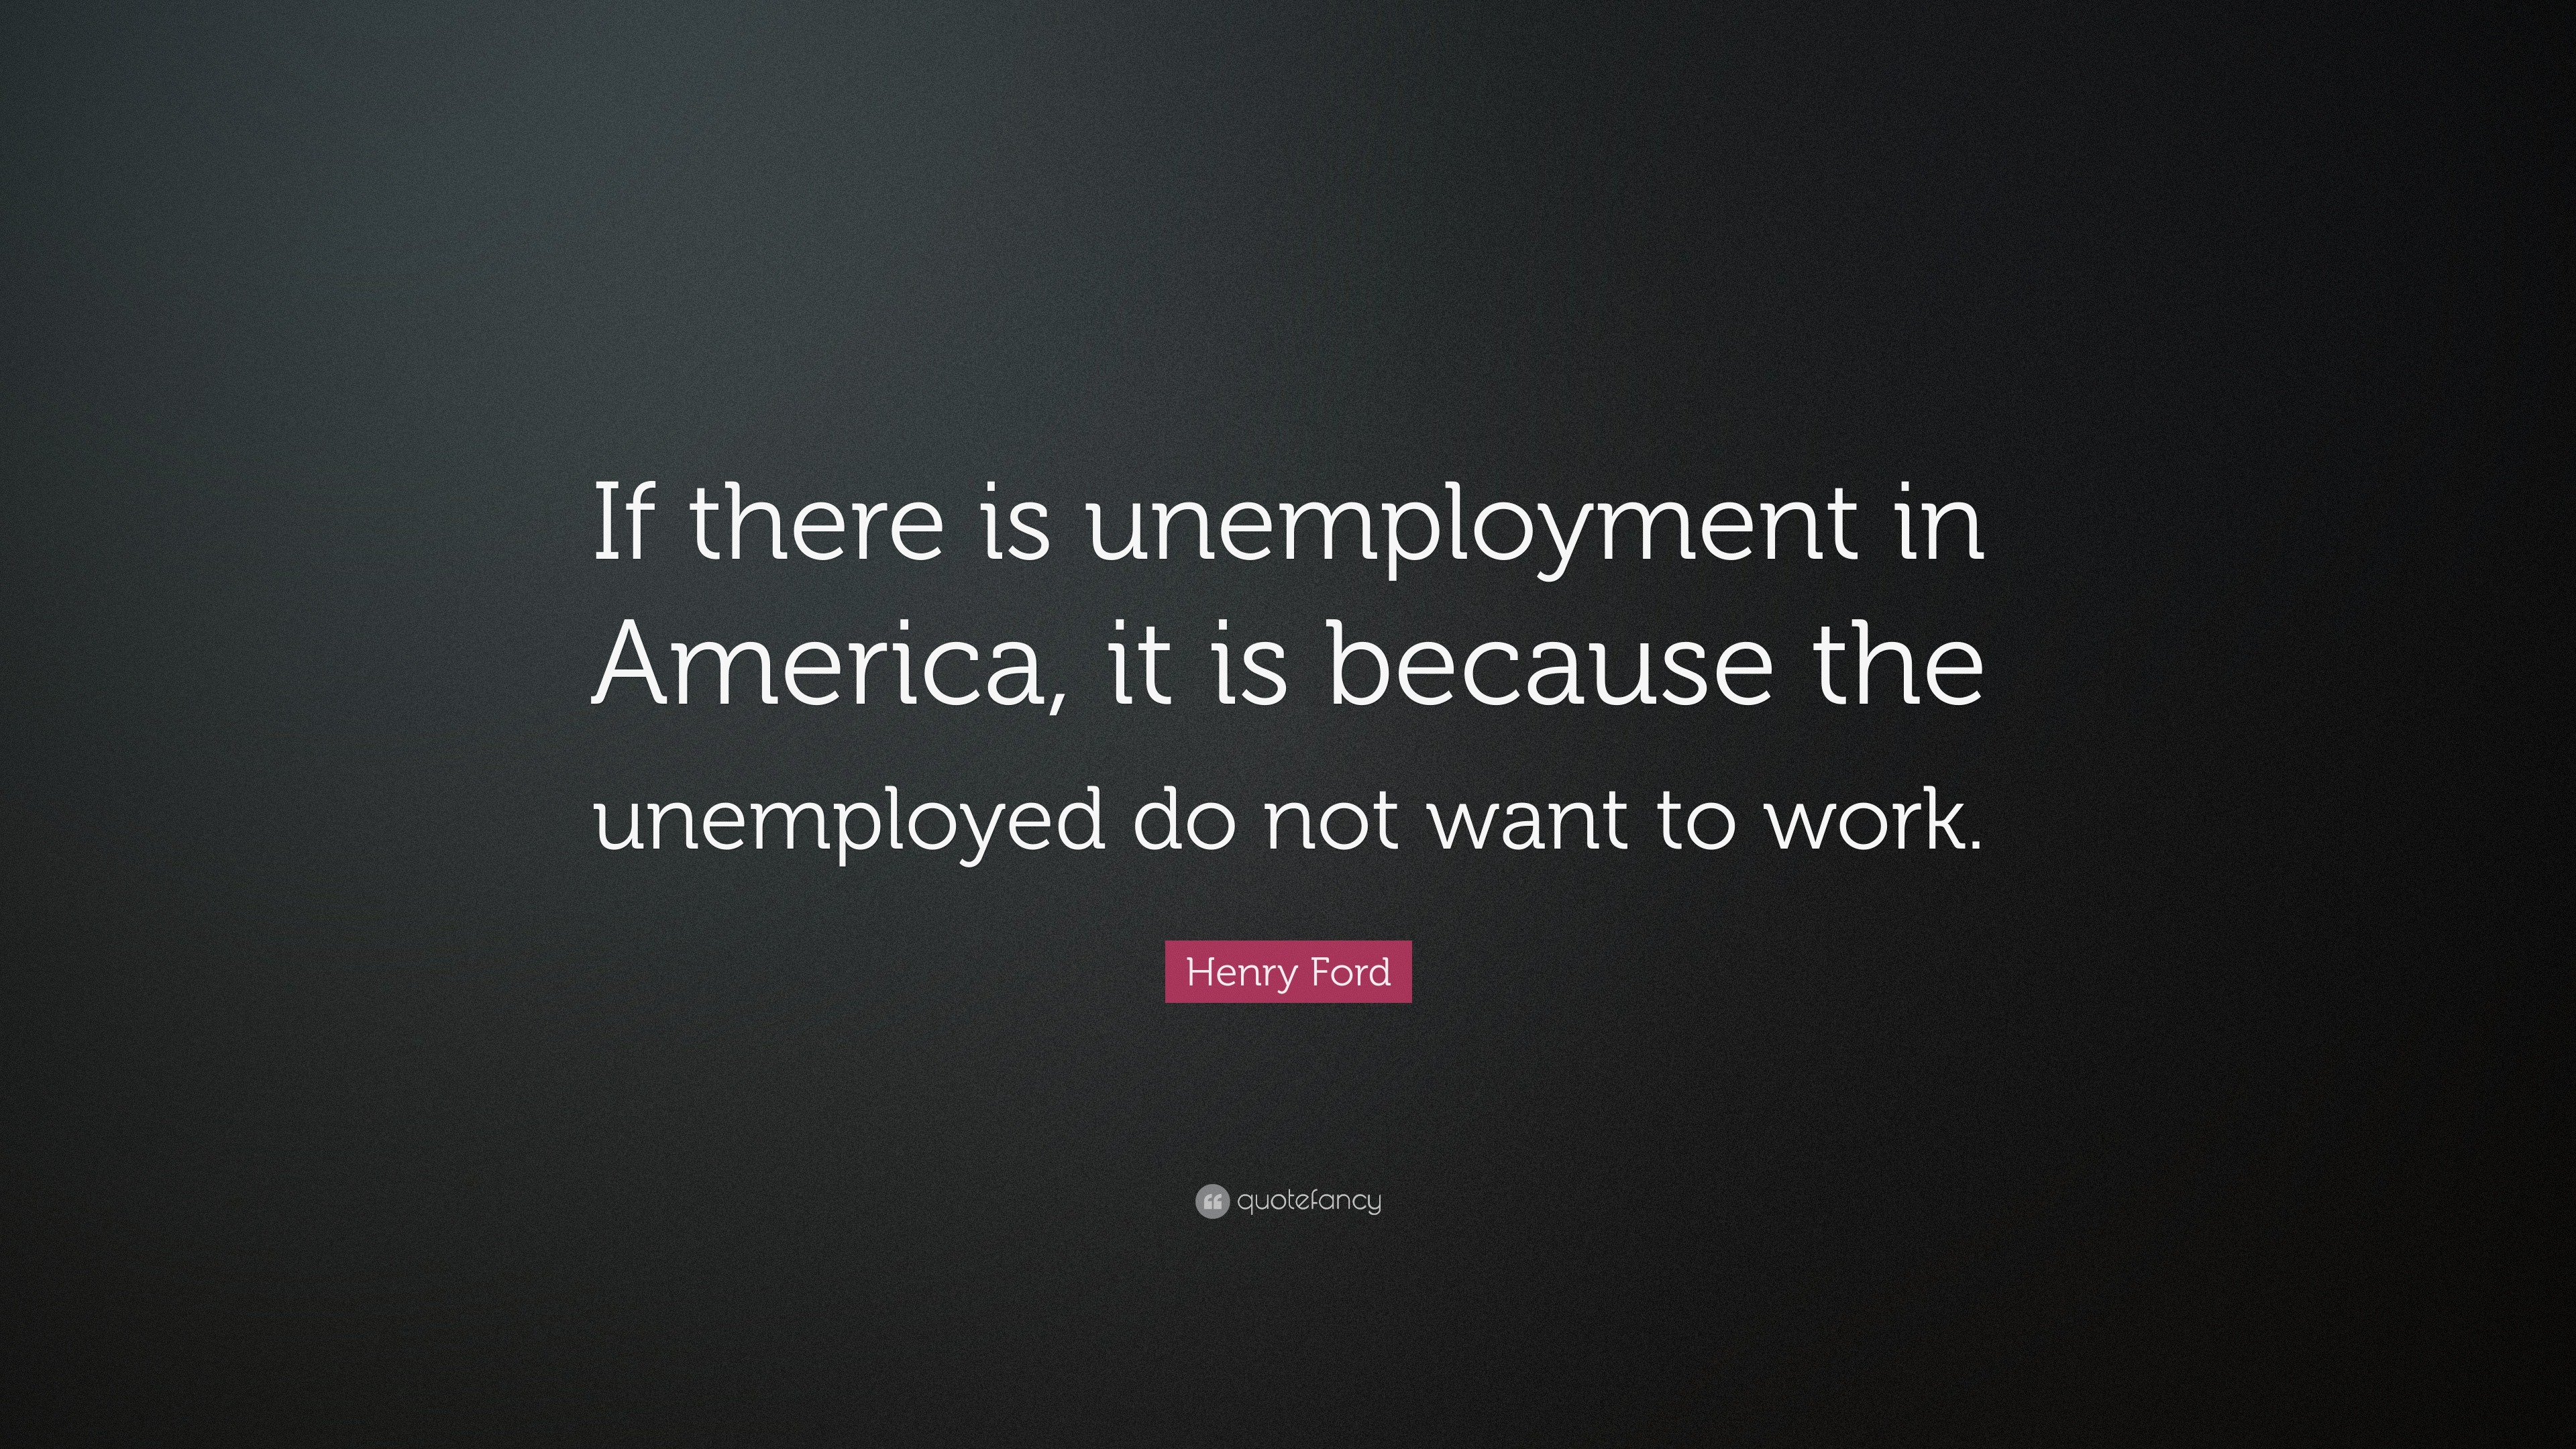 Henry Ford Quote: “If there is unemployment in America, it is because the  unemployed do not